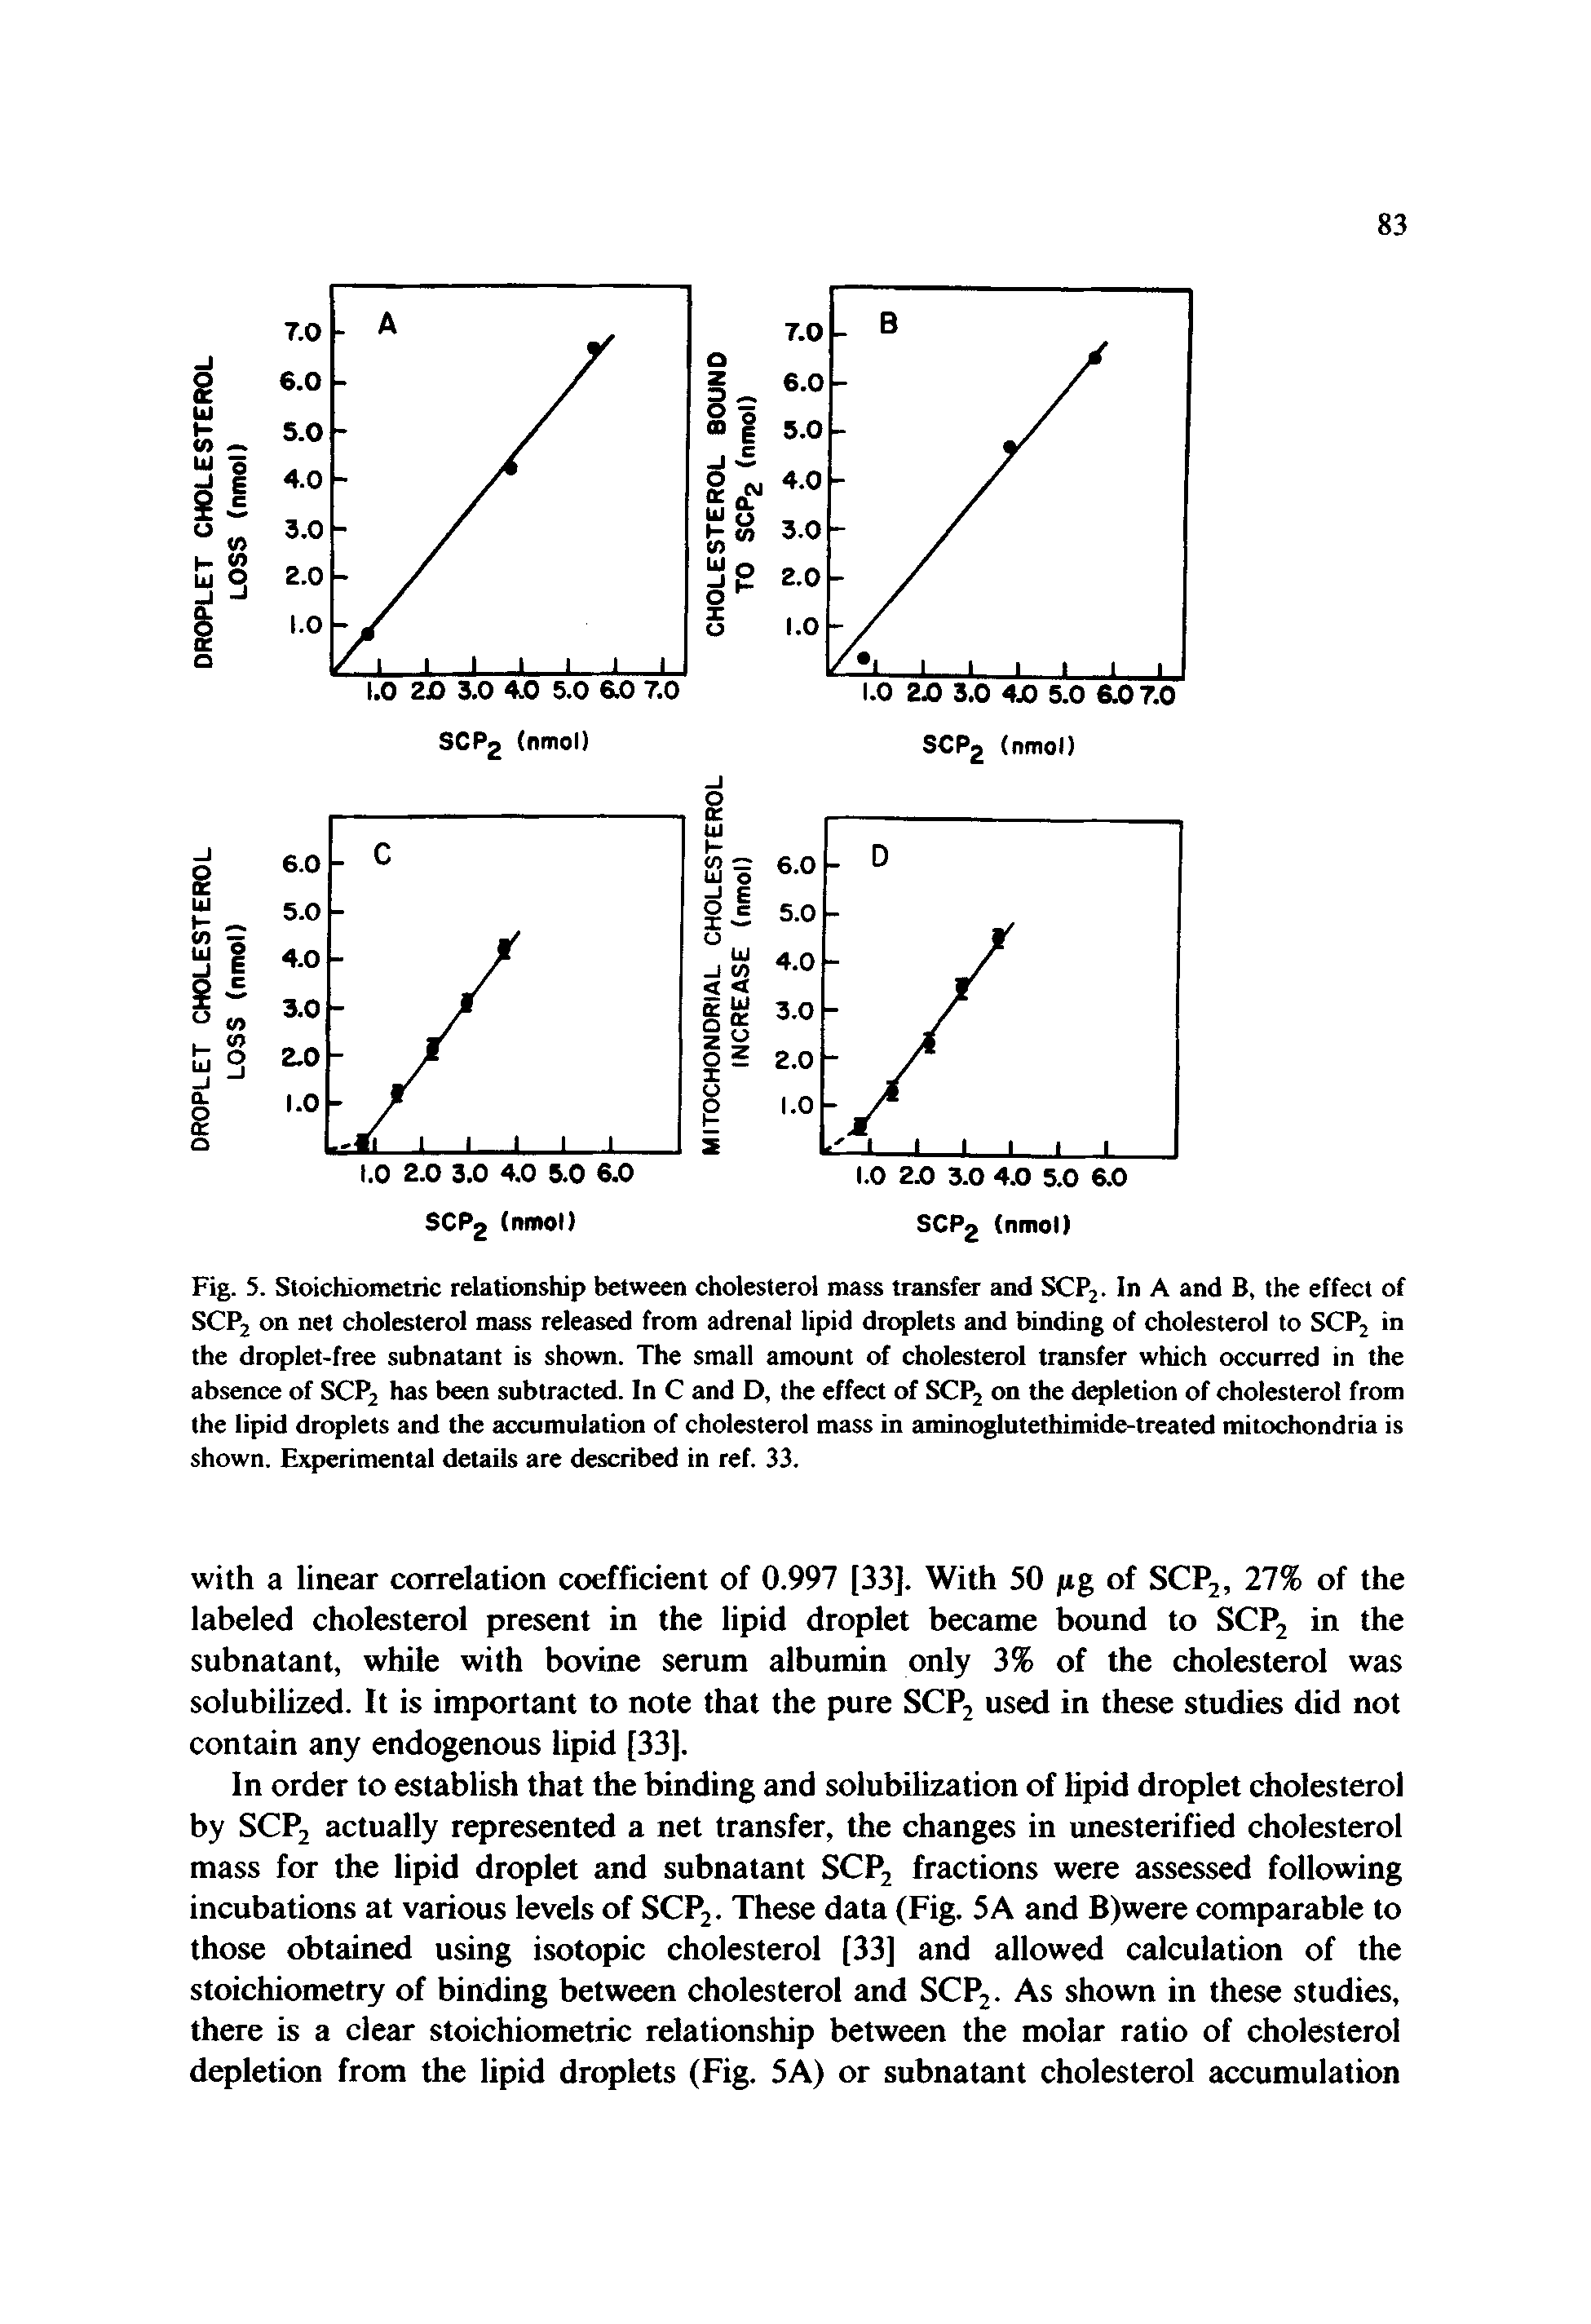 Fig. 5. Stoicliiometric relationship between cholesterol mass transfer and SCP2. In A and B, the effect of SCP2 on net cholesterol mass released from adrenal lipid droplets and binding of cholesterol to SCP2 in the droplet-free subnatant is shown. The small amount of cholesterol transfer which occurred in the absence of SCP2 has been subtracted. In C and D, the effect of SCP2 on the depletion of cholesterol from the lipid droplets and the accumulation of cholesterol mass in aminoglutethimide-treated mitochondria is shown. Experimental details are described in ref. 33.